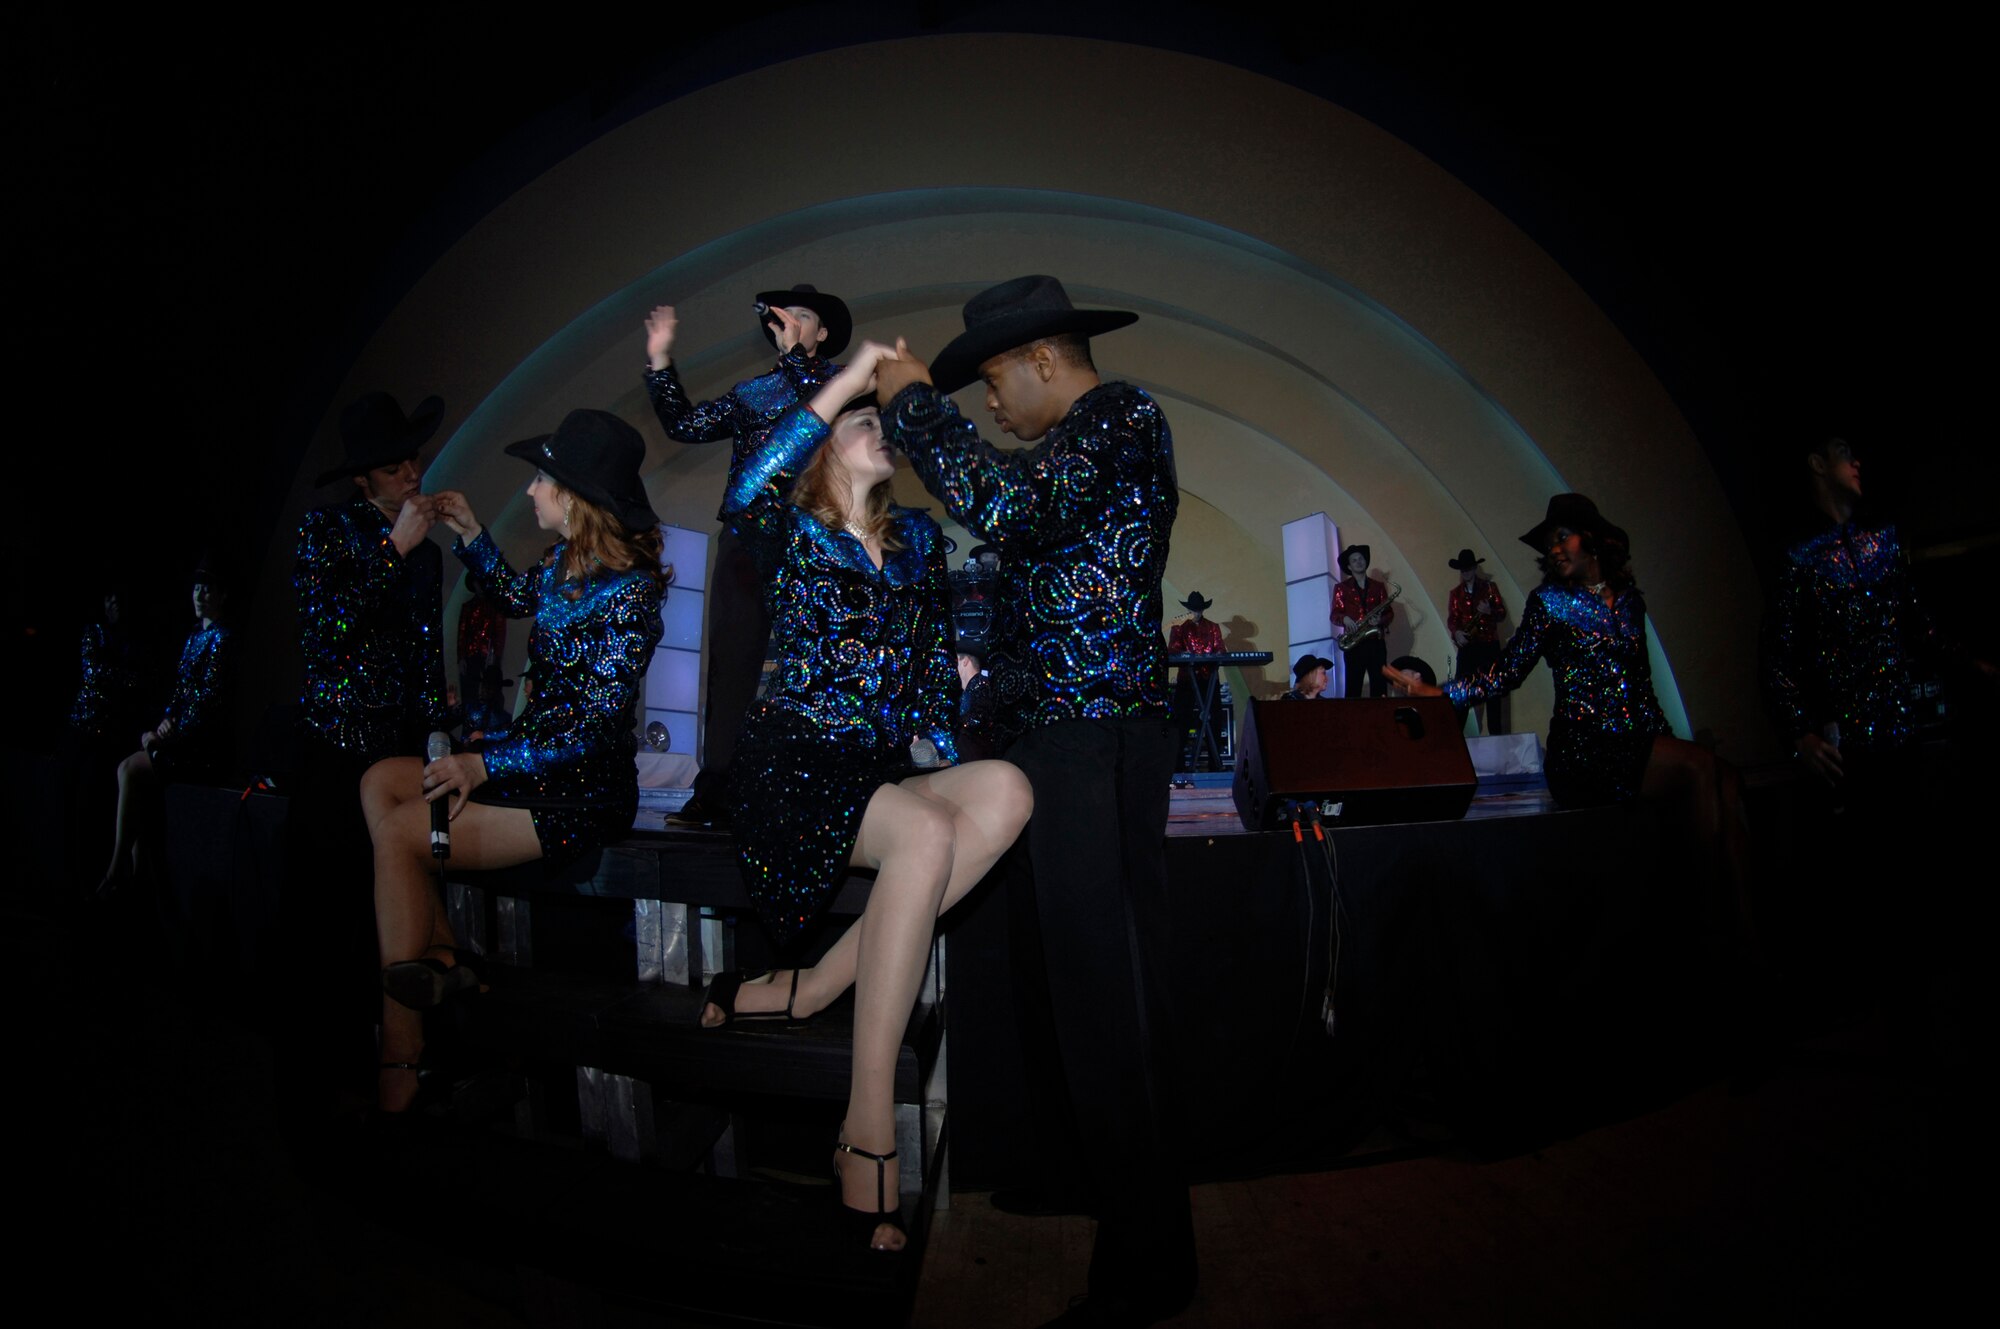 Members of Tops In Blue perform at the Cotillion Ballroom in Wichita, Kan. Jan. 31. Members of McConnell Air Force Base and the surrounding community enjoyed the free show despite cold weather conditions. Tops In Blue perform in various locations including hostile locations for deployed members. (Air Force photo by Senior Airman Jamie Train, 22nd Communications Squadron) 